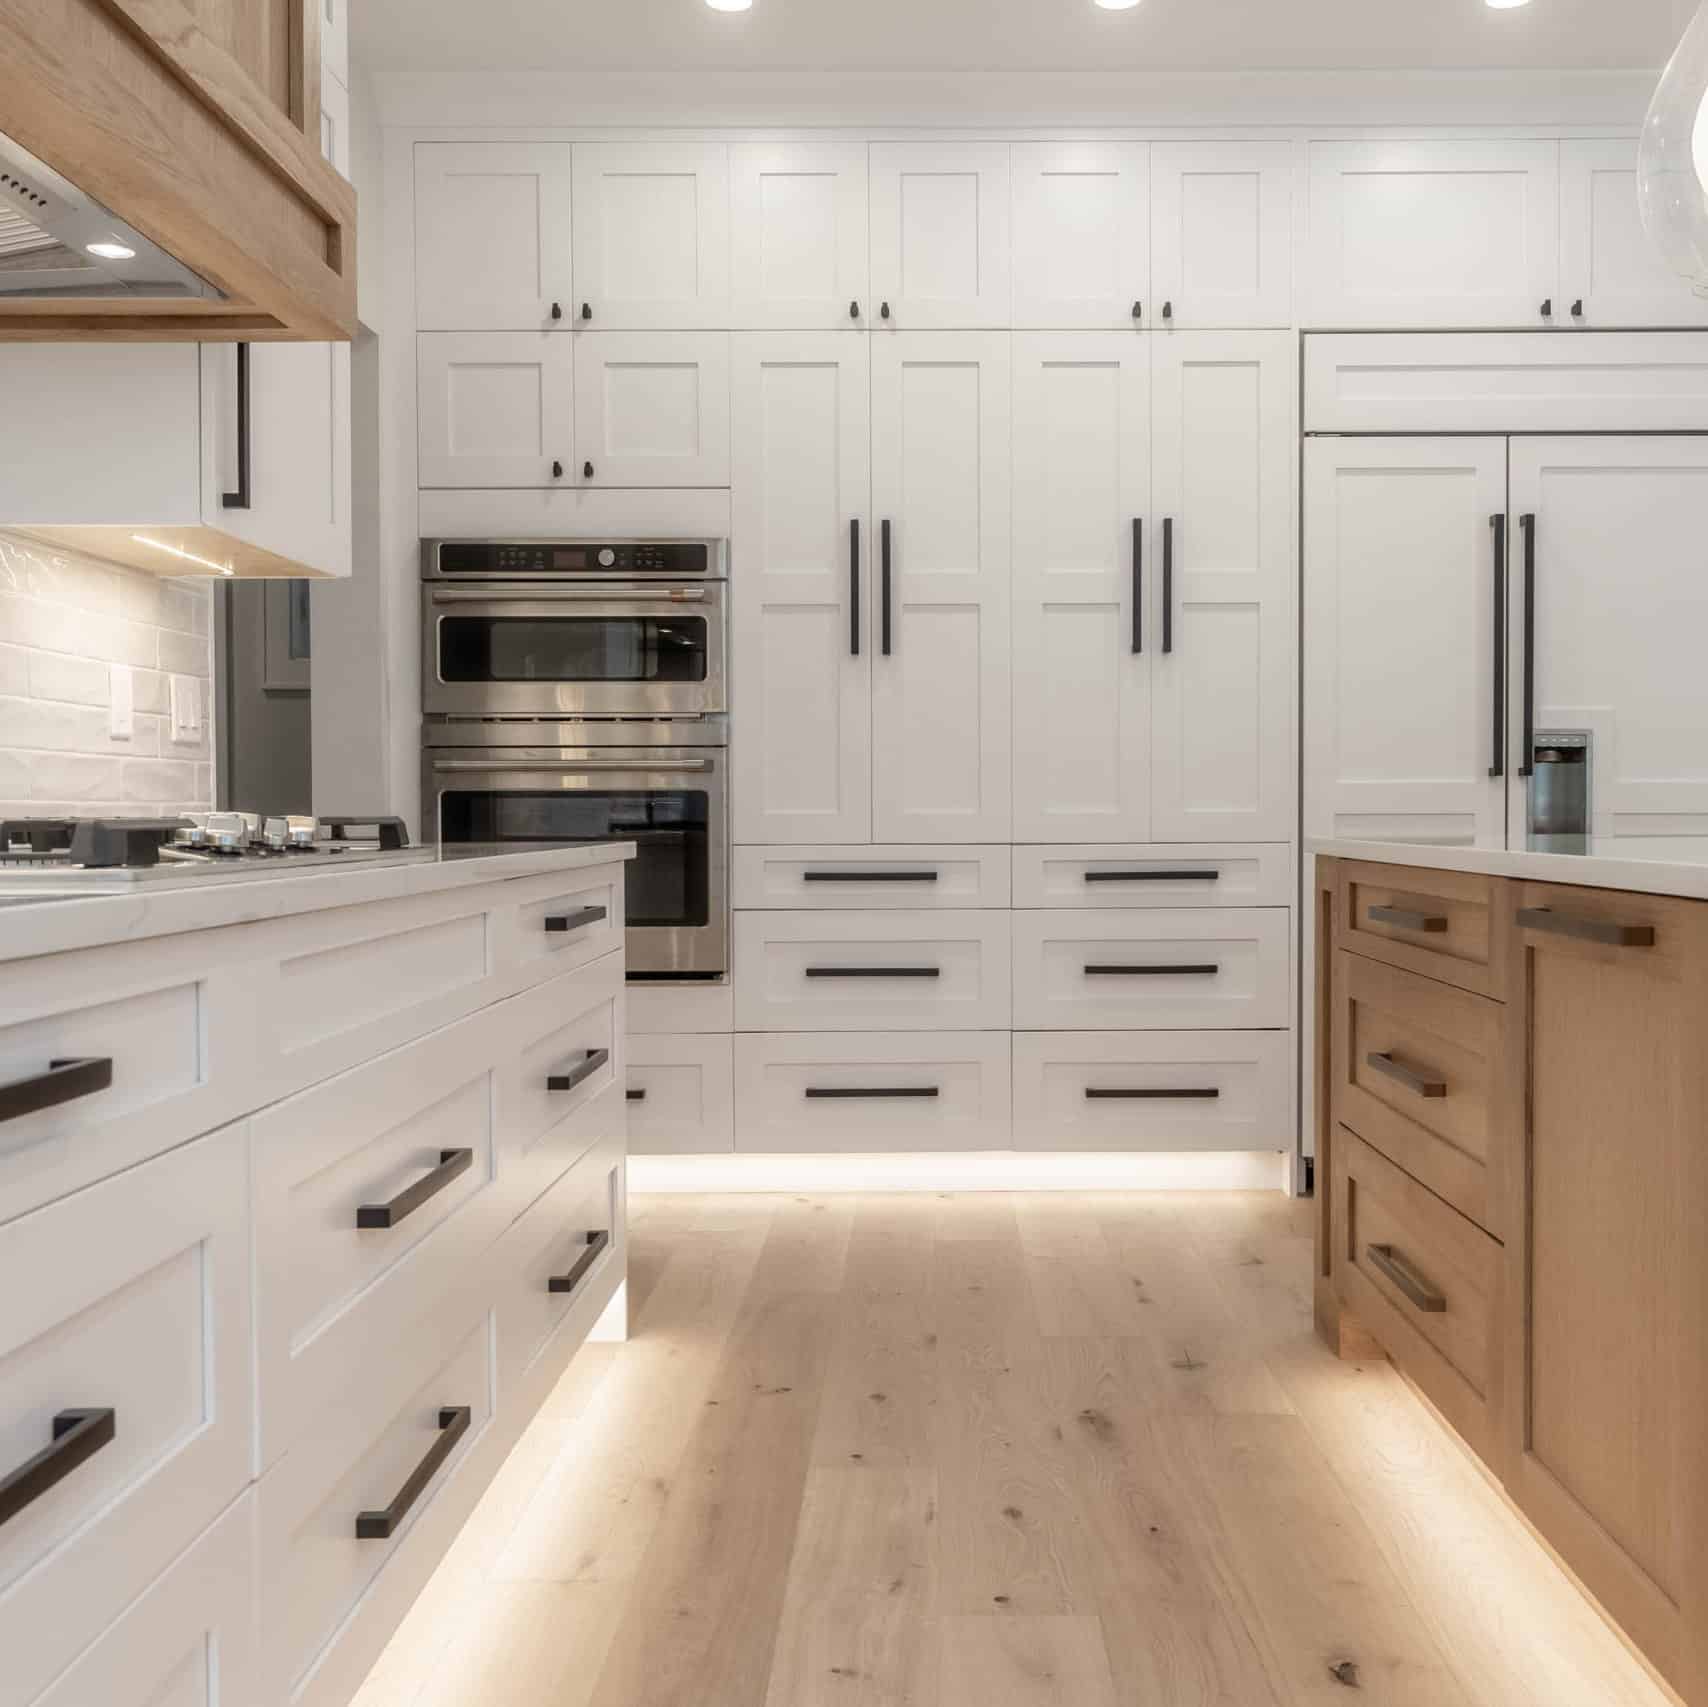 Pantry wall of a large kitchen. The cabinets on the wall are floor to ceiling. They are white shaker cabinets with black hardware. There is a paneled fridge that blends into the cabinets, and two wall ovens.